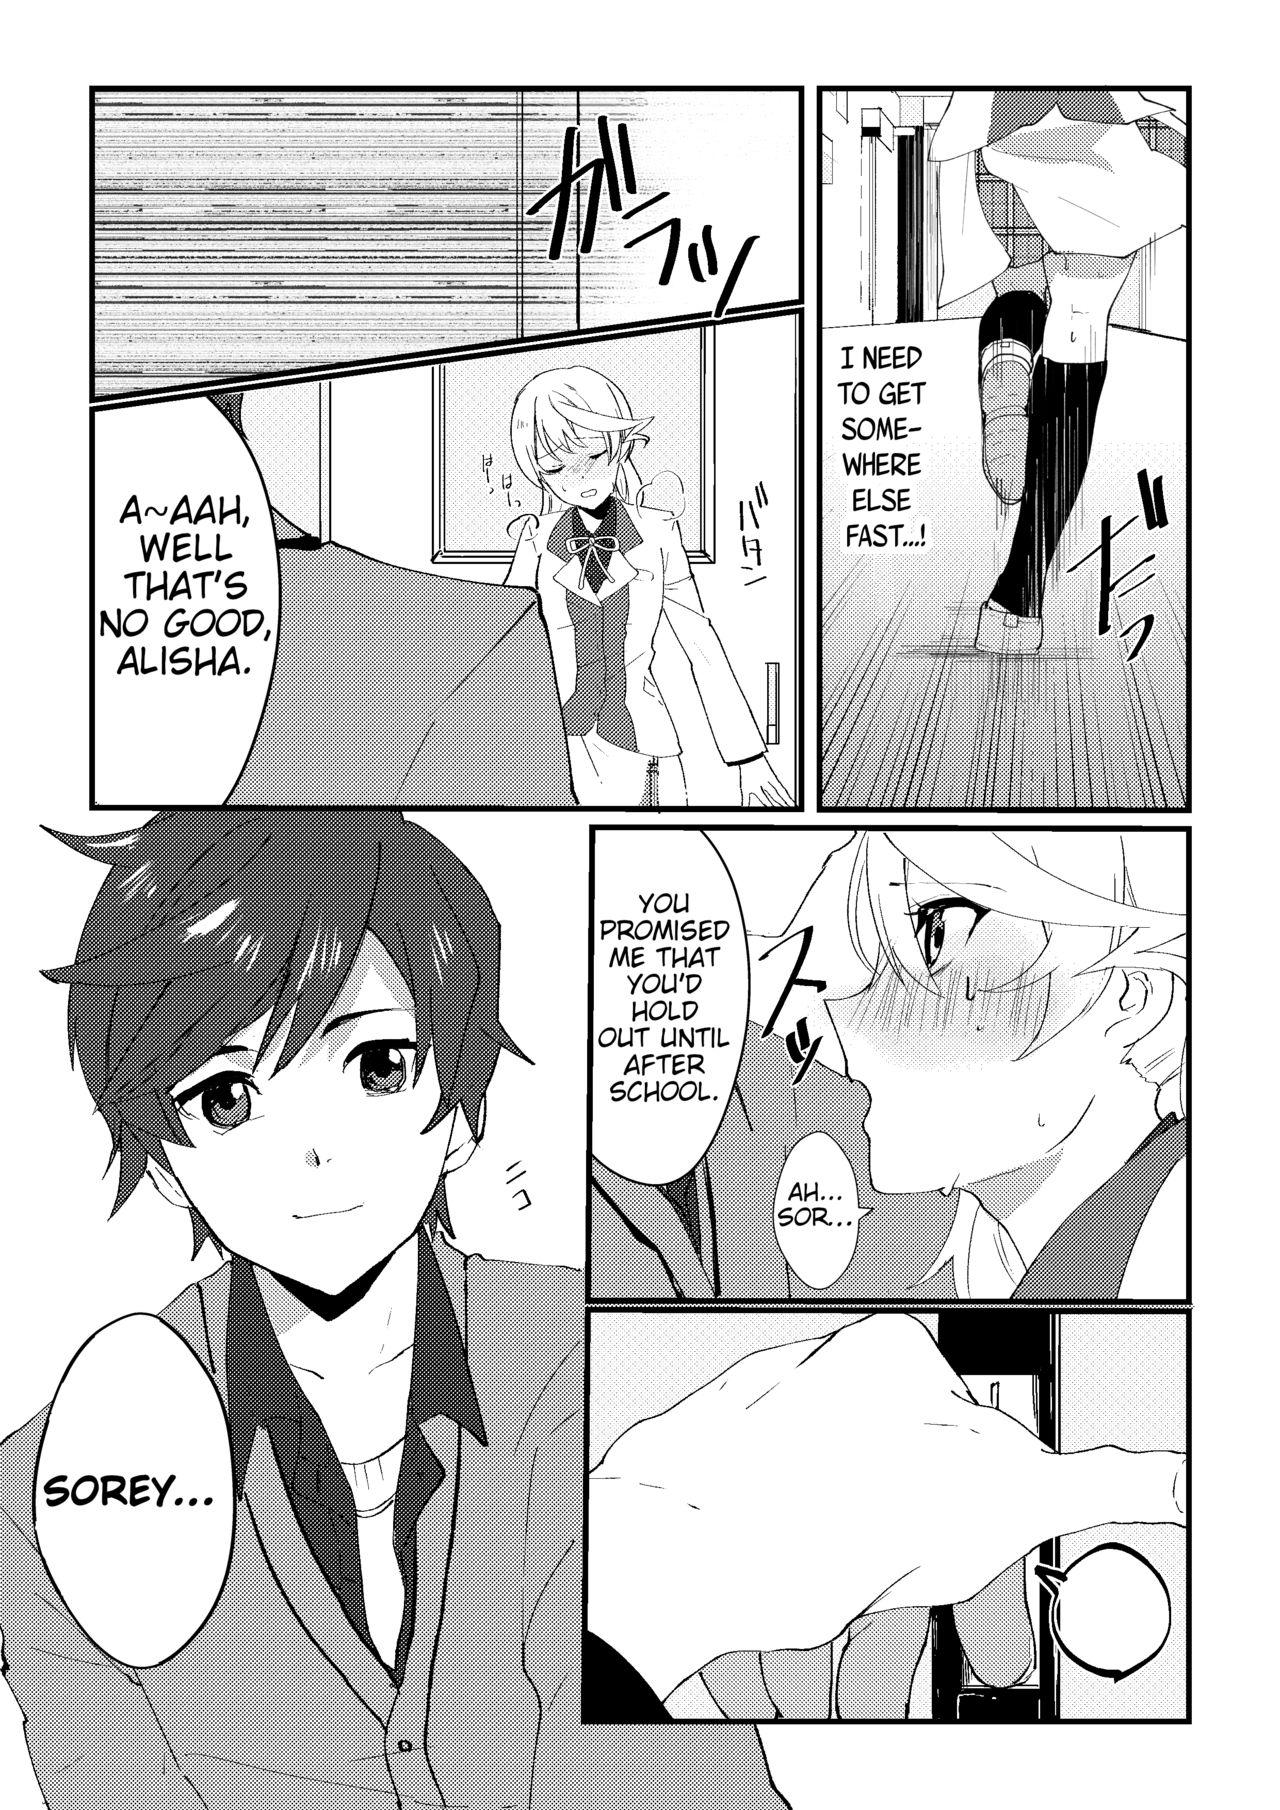 Homemade crazy about you - Tales of zestiria Namorada - Page 4